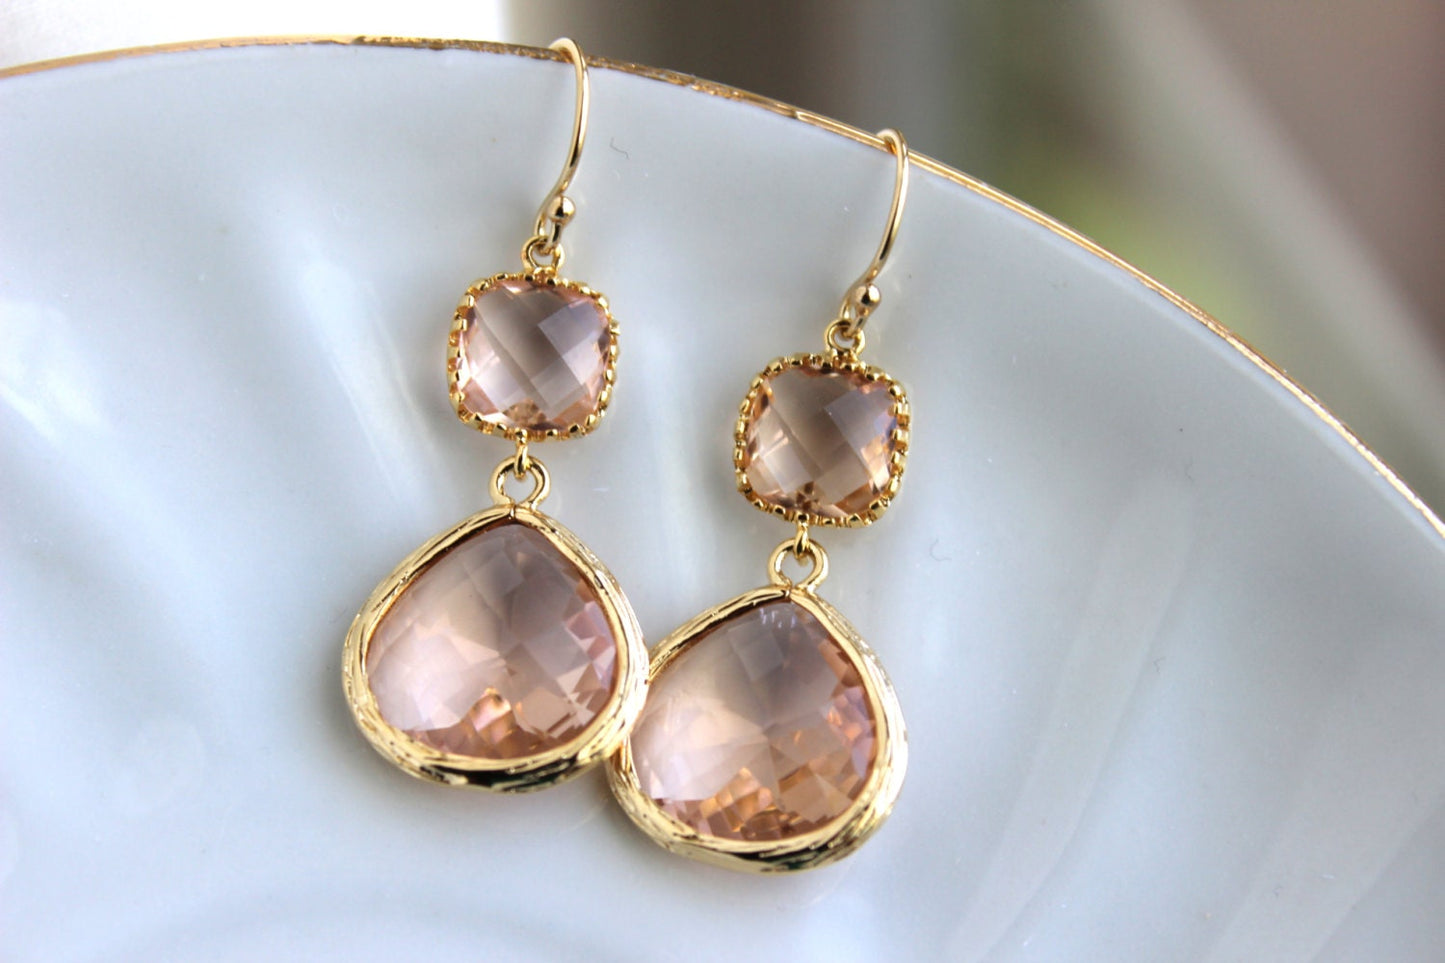 Gold Large Champagne Blush Earrings Peach Pink Jewelry - Two Tiered Earrings Blush Bridesmaid Jewelry - Peach Pink Wedding Jewelry